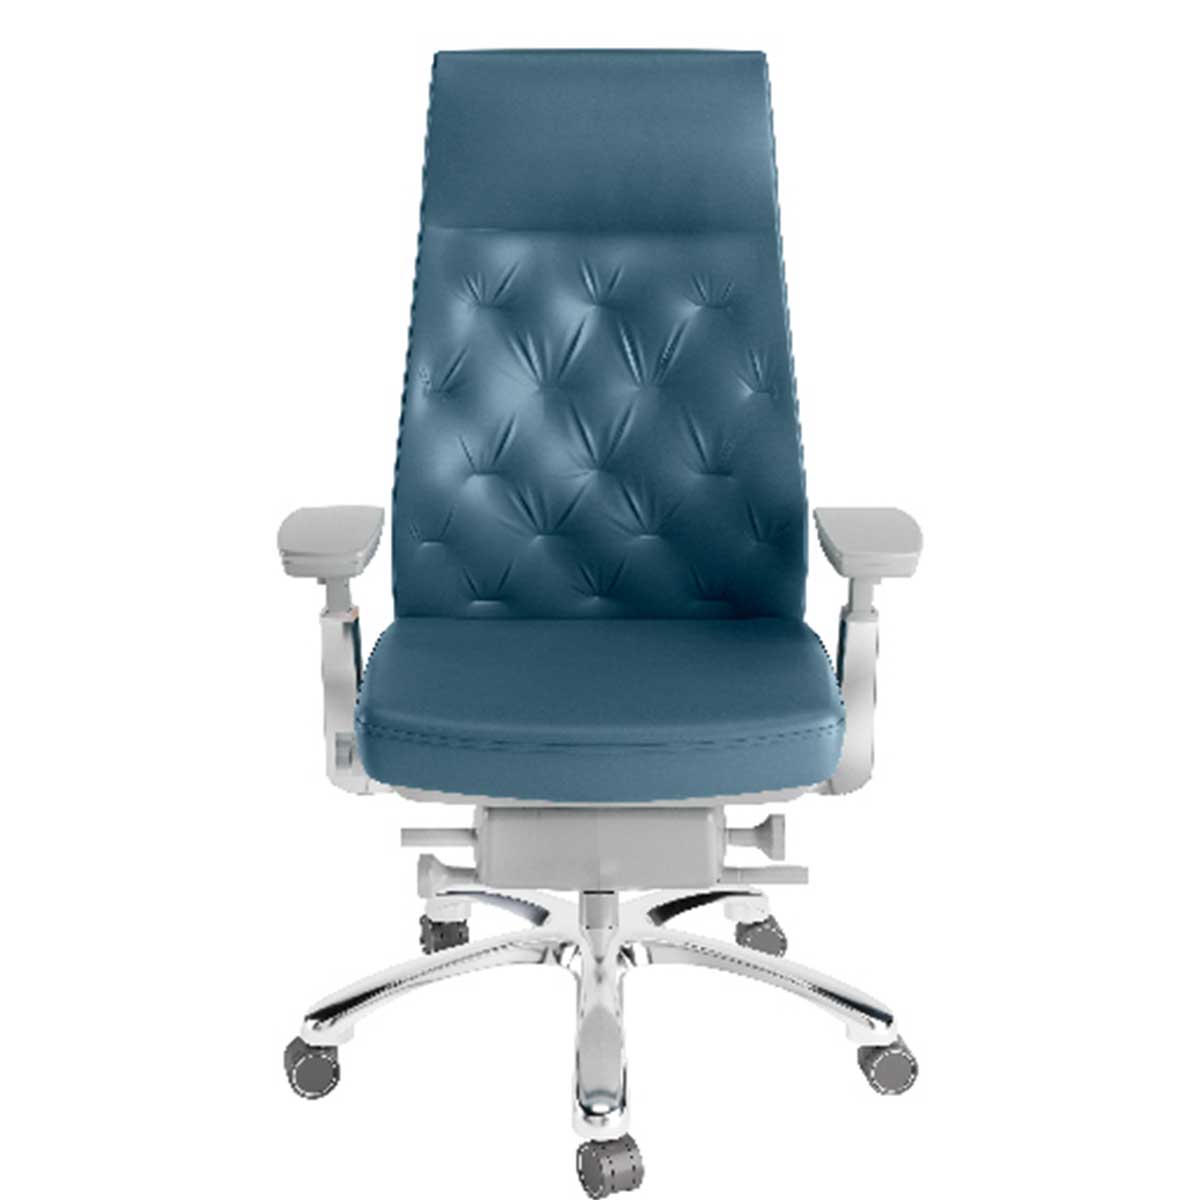 Boss Chair Manufacturers, Suppliers in Golf Course